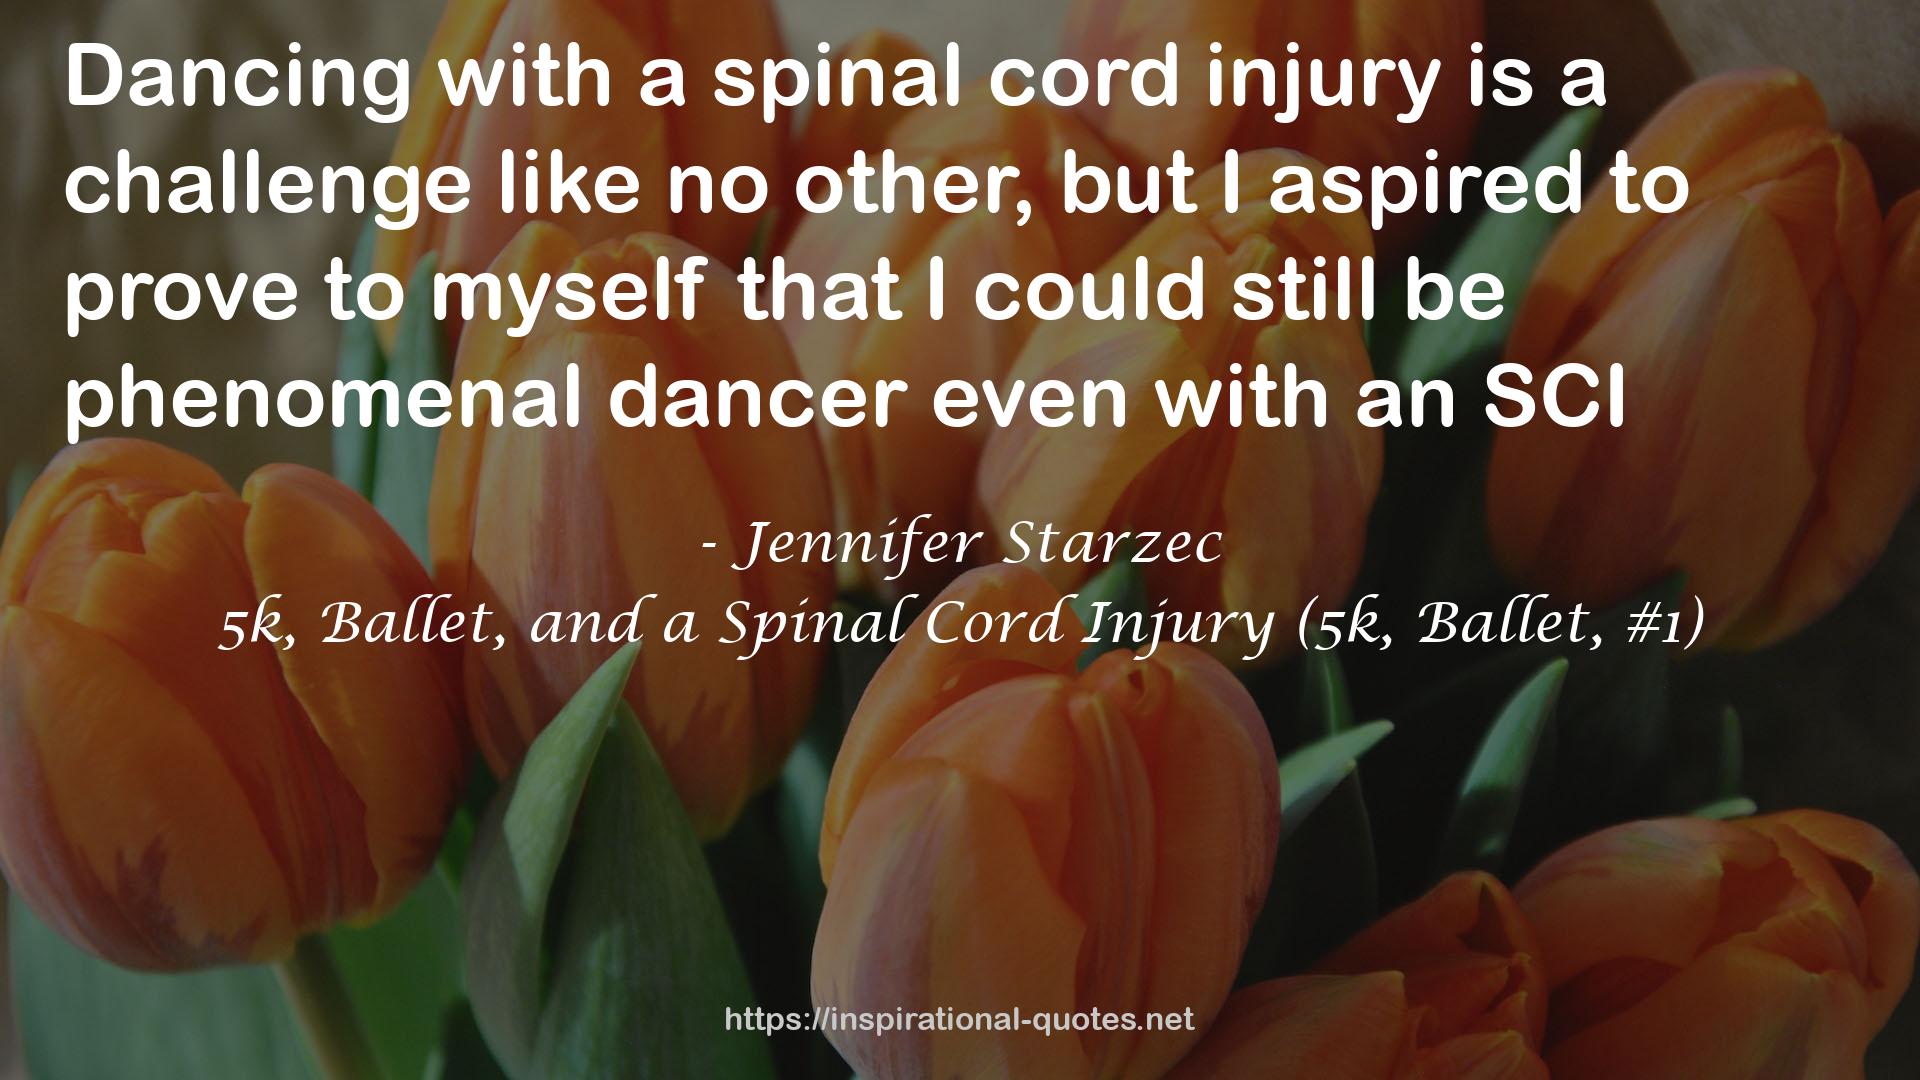 5k, Ballet, and a Spinal Cord Injury (5k, Ballet, #1) QUOTES